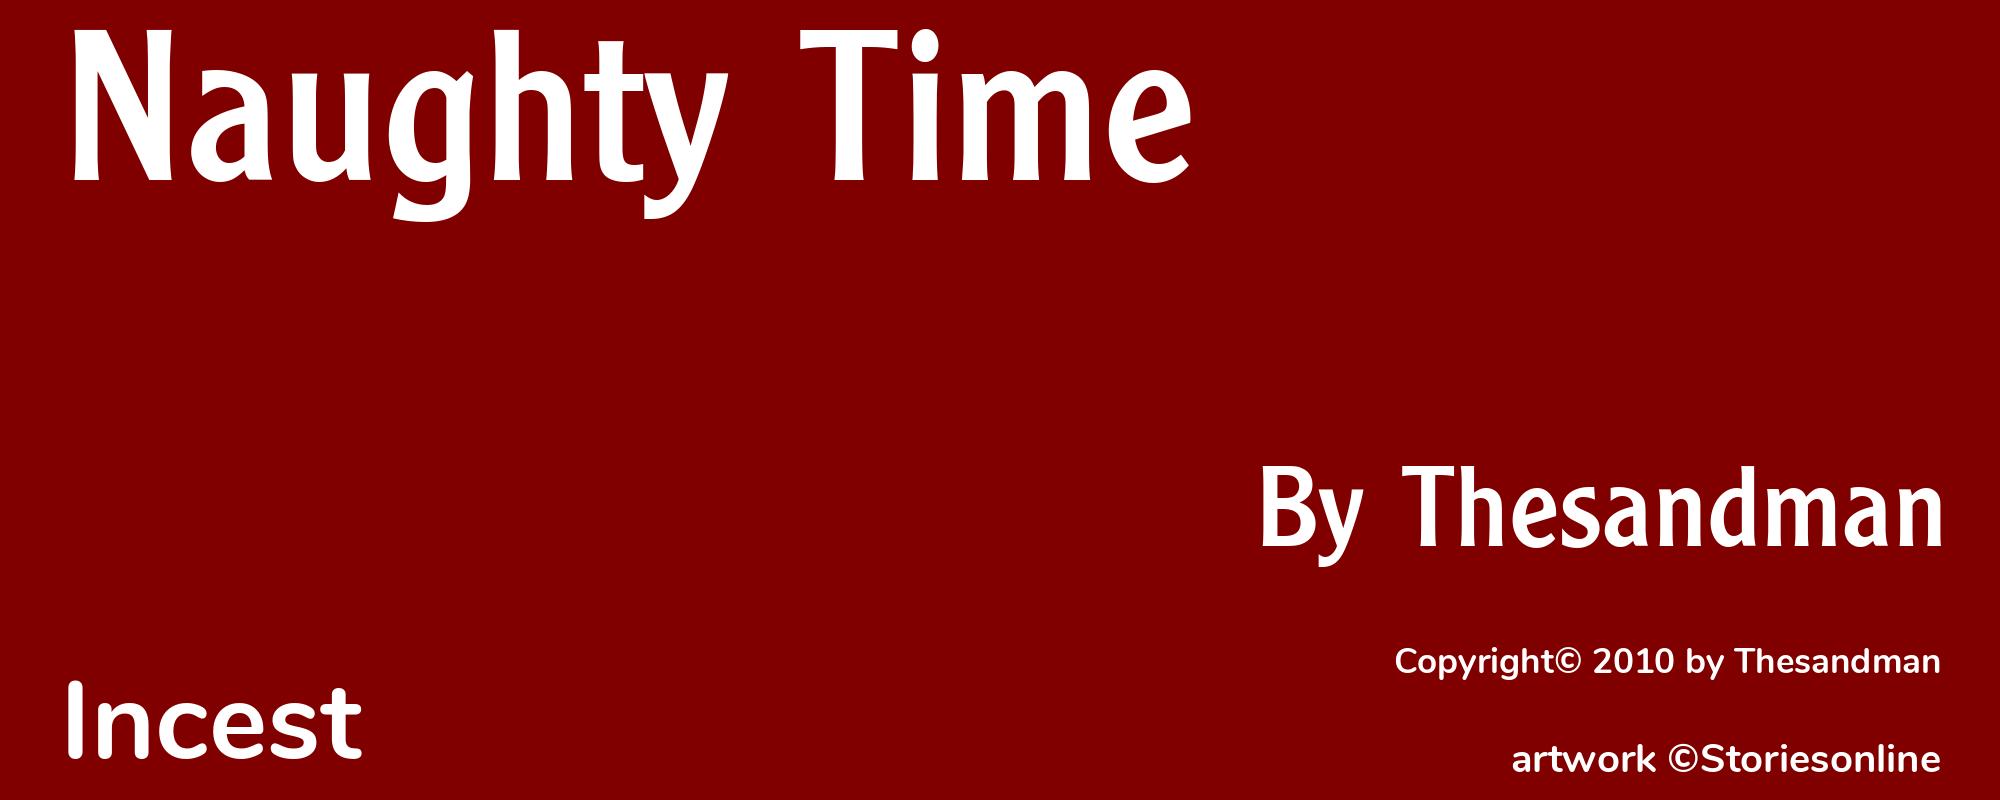 Naughty Time - Cover